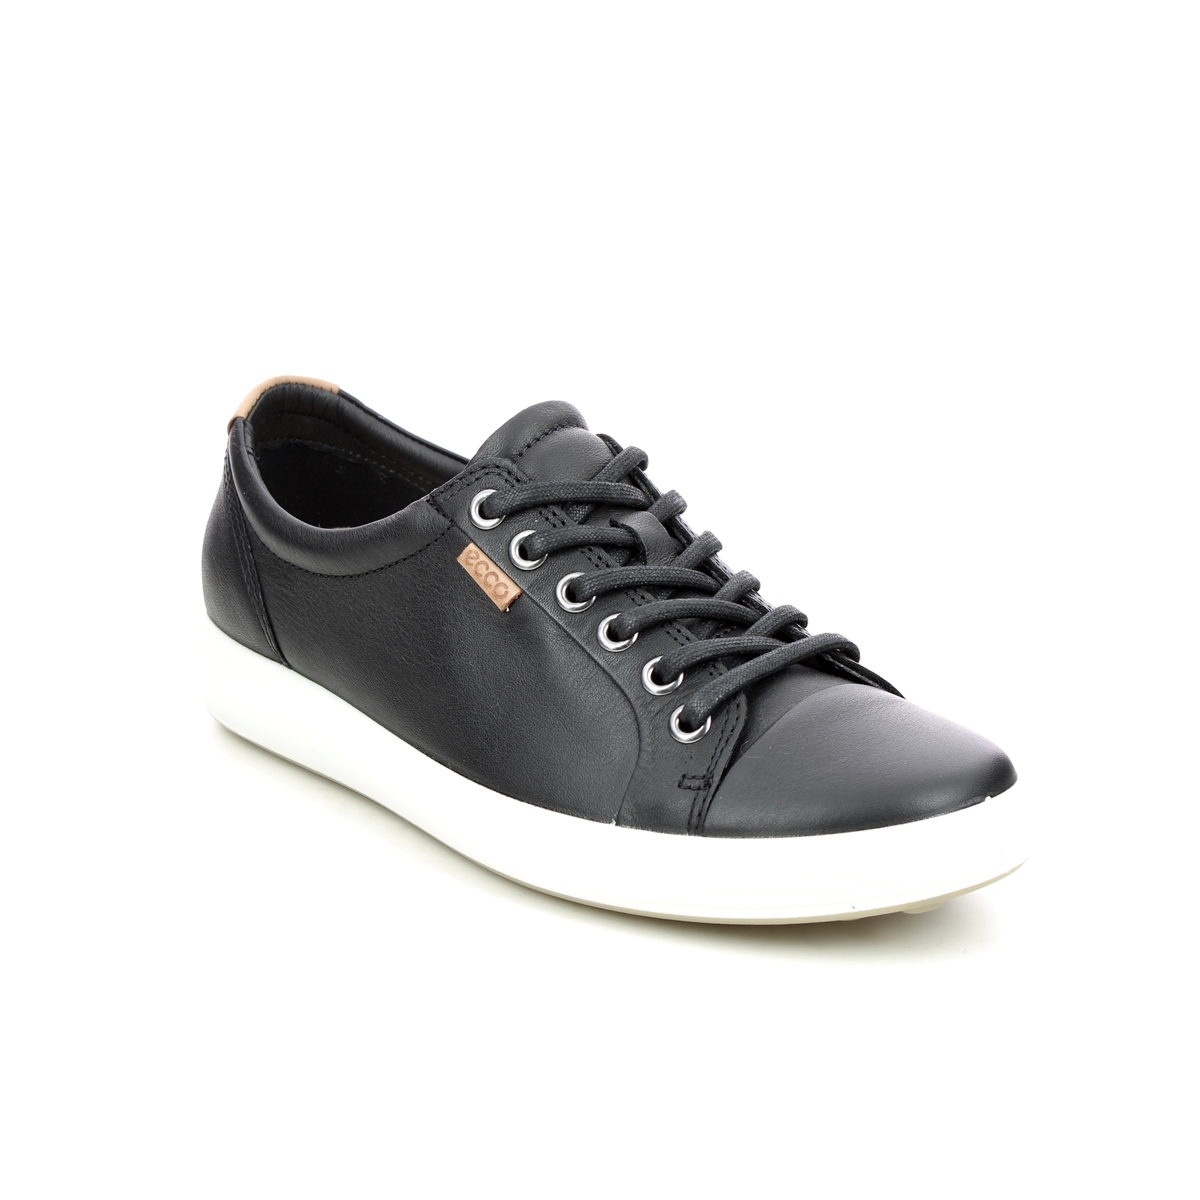 Ecco Soft 7 Lace Black Leather Womens Trainers 430003-01001 In Size 38 In Plain Black Leather